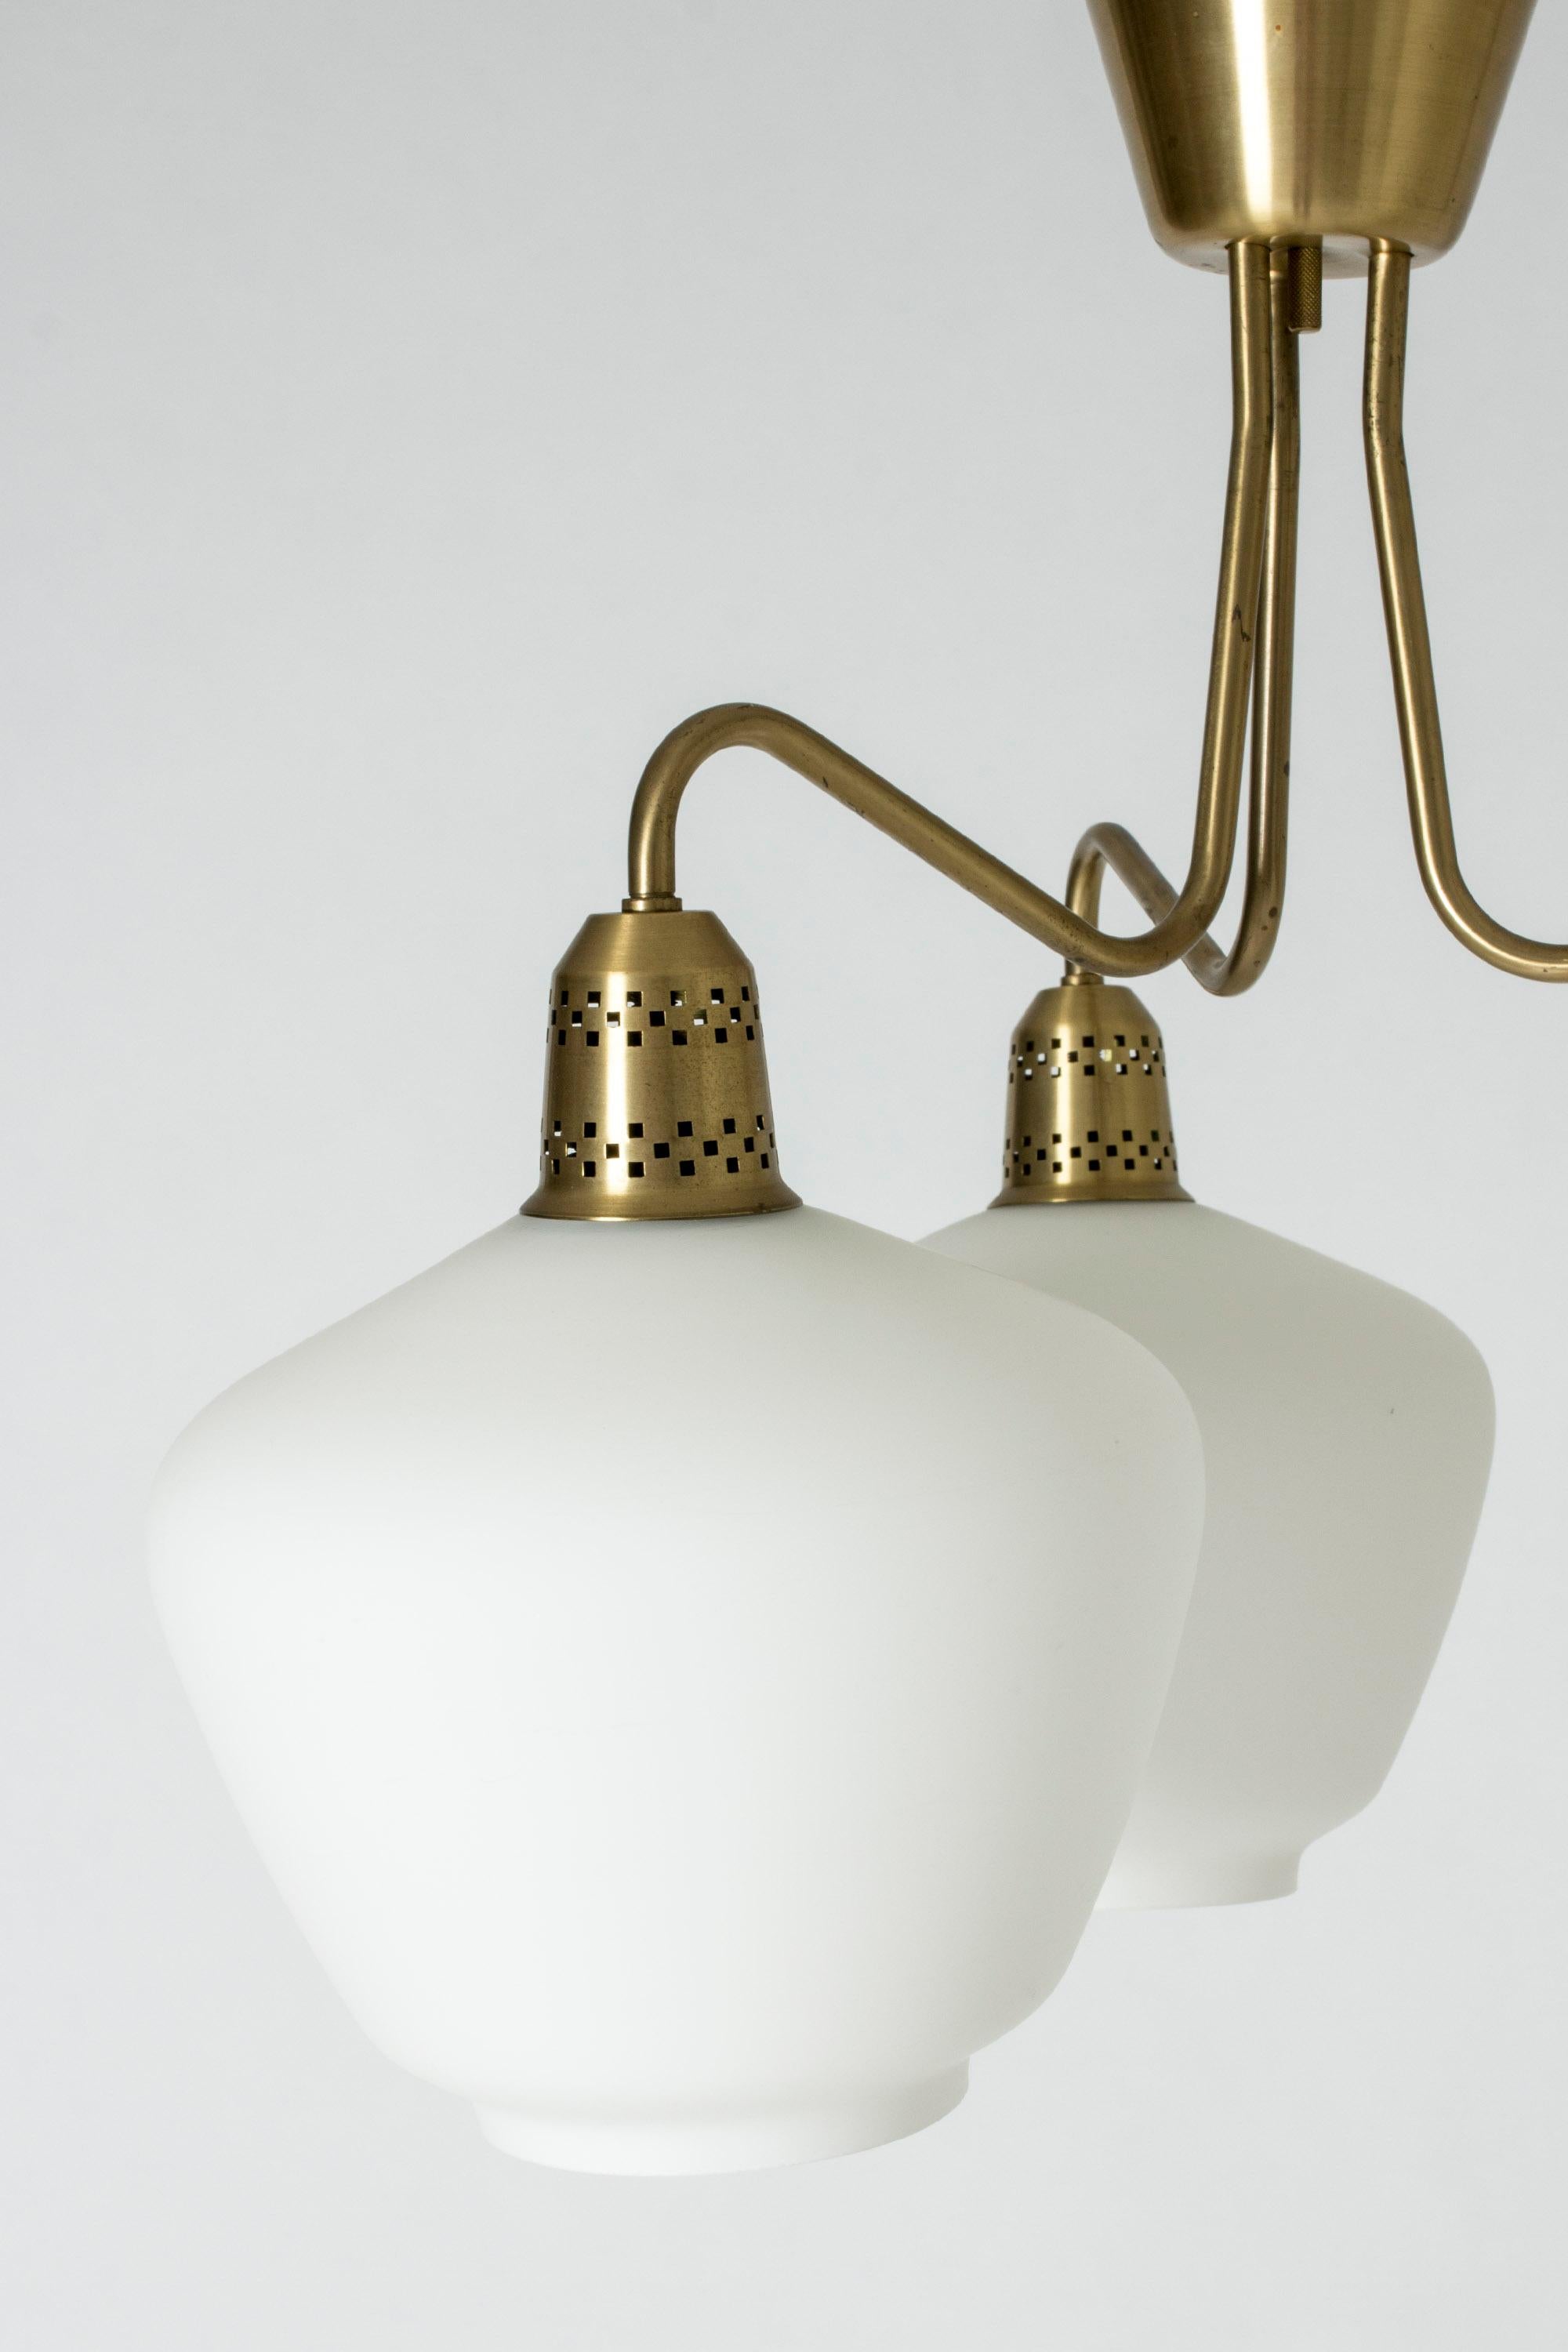 Mid-20th Century Swedish Midcentury Brass and Glass Chandelier, 1950s